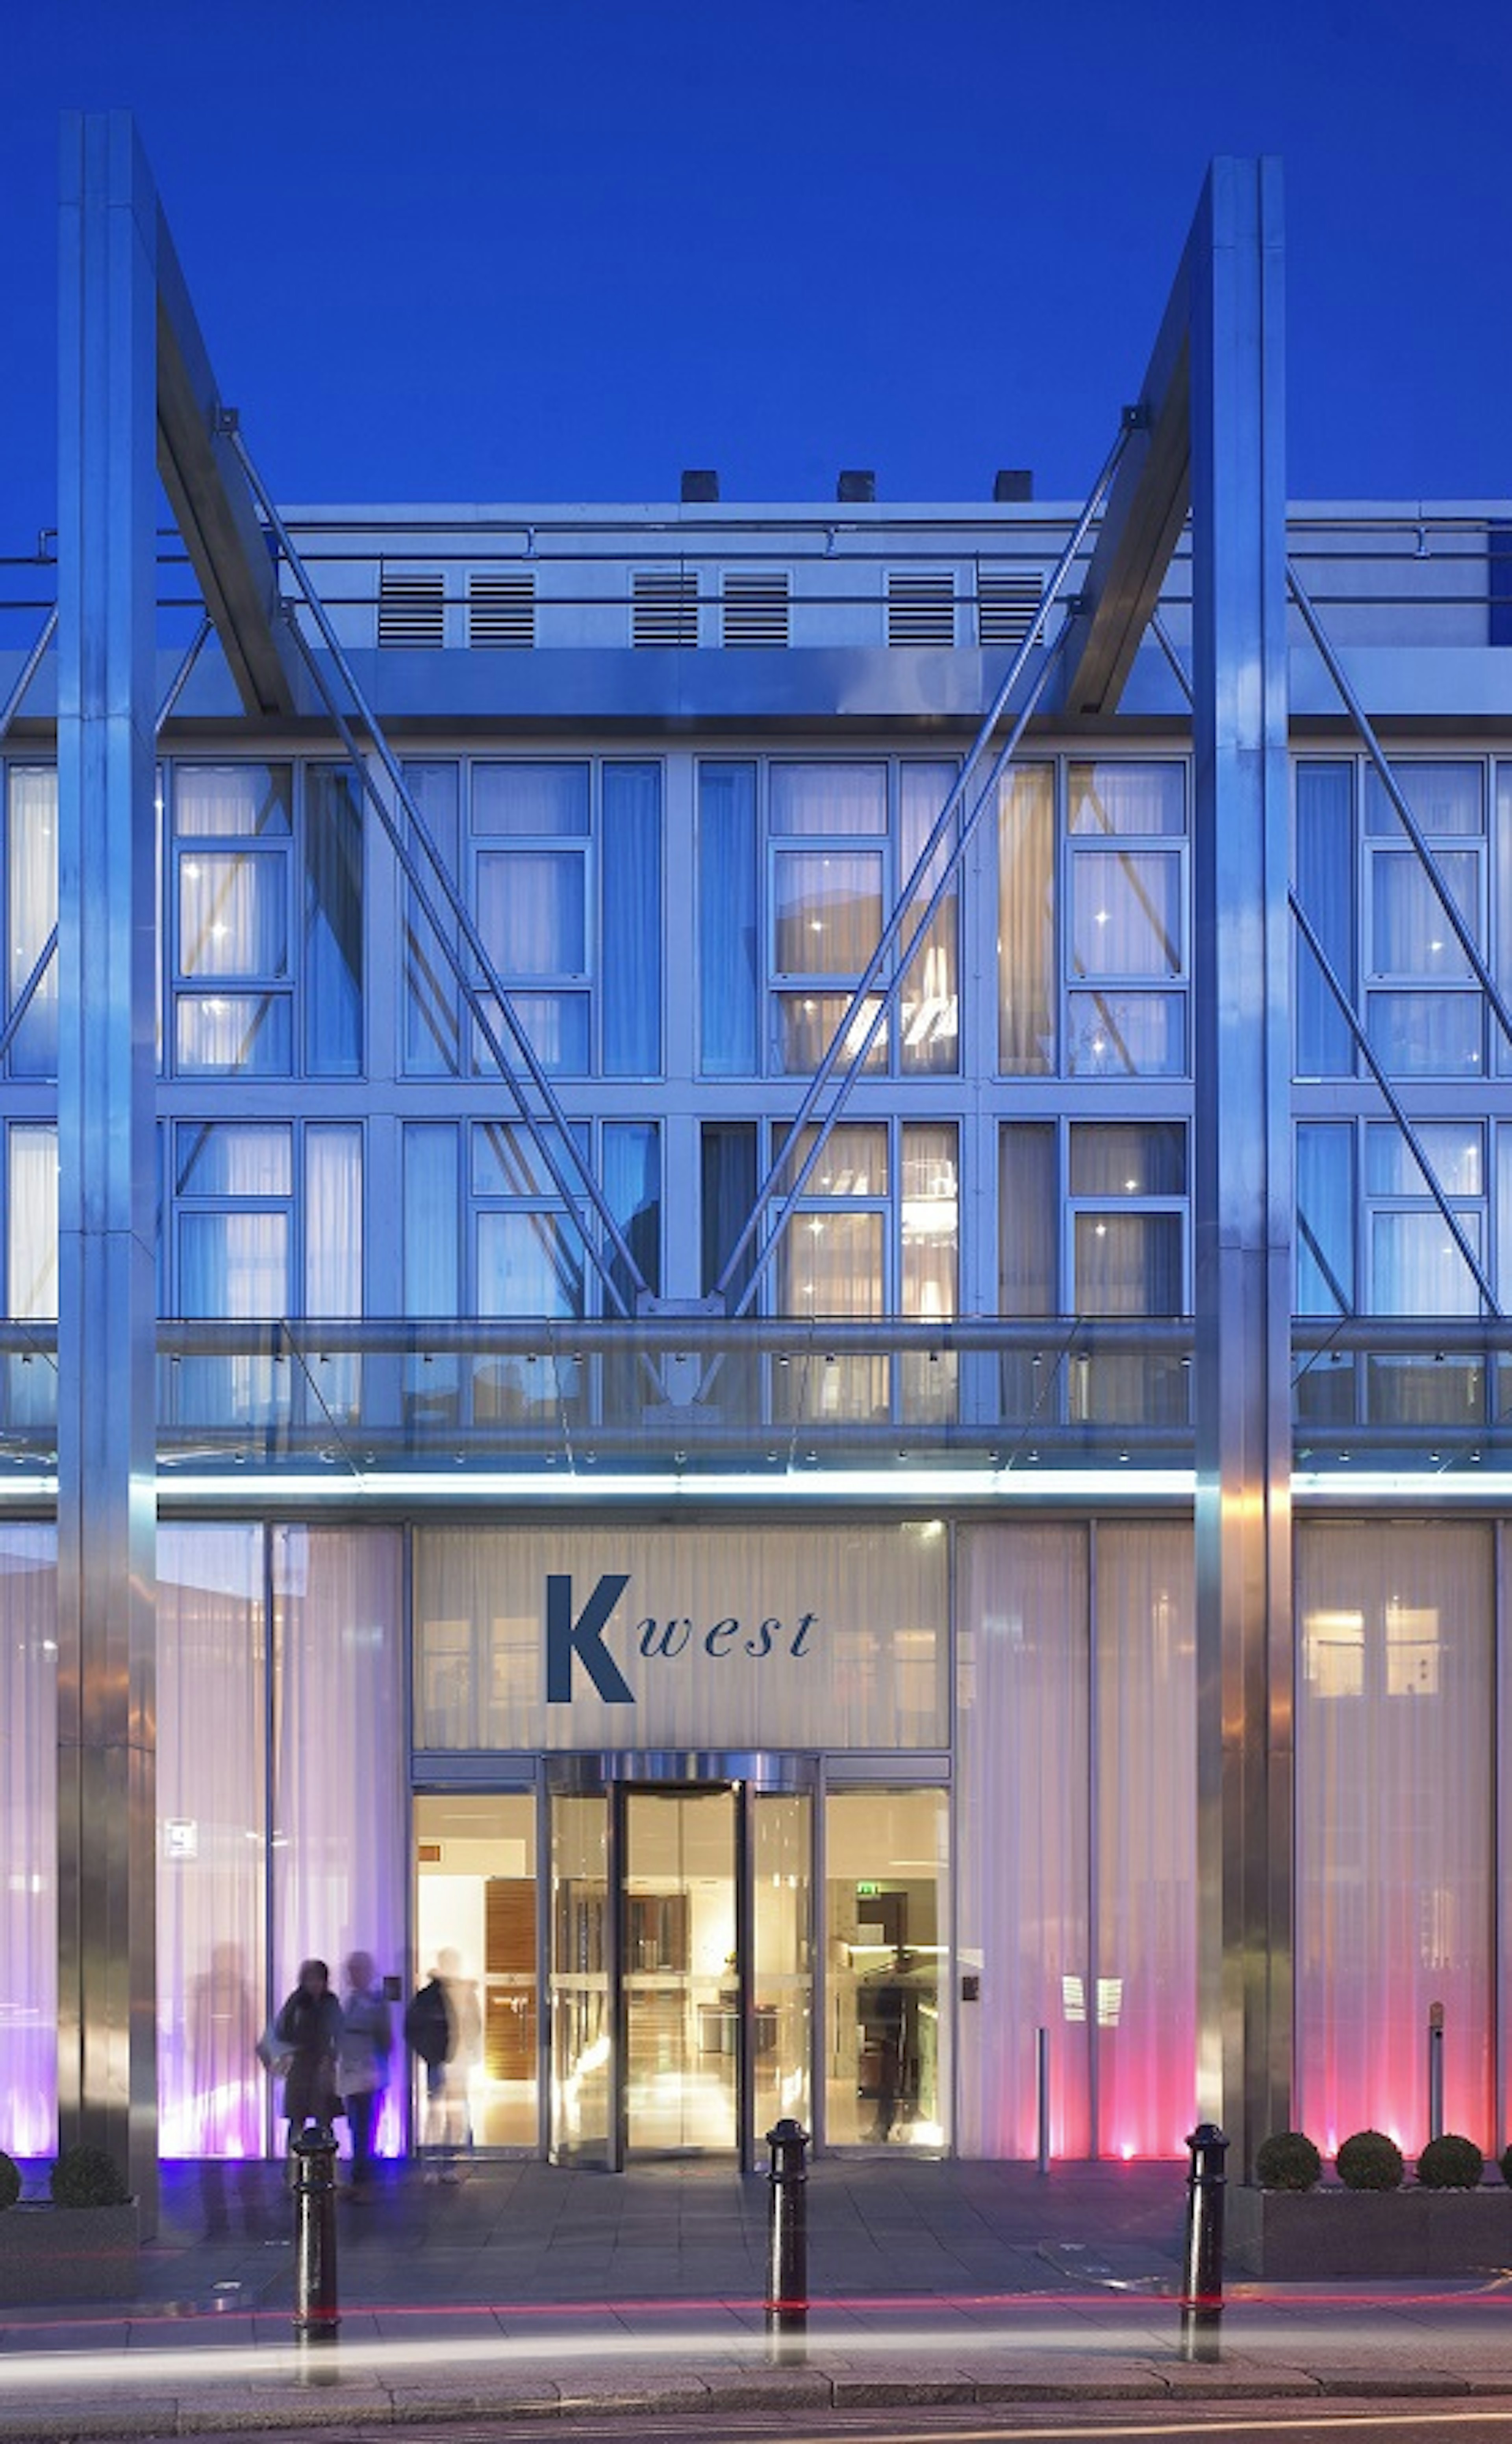 Conference Hotels - K West Hotel & Spa